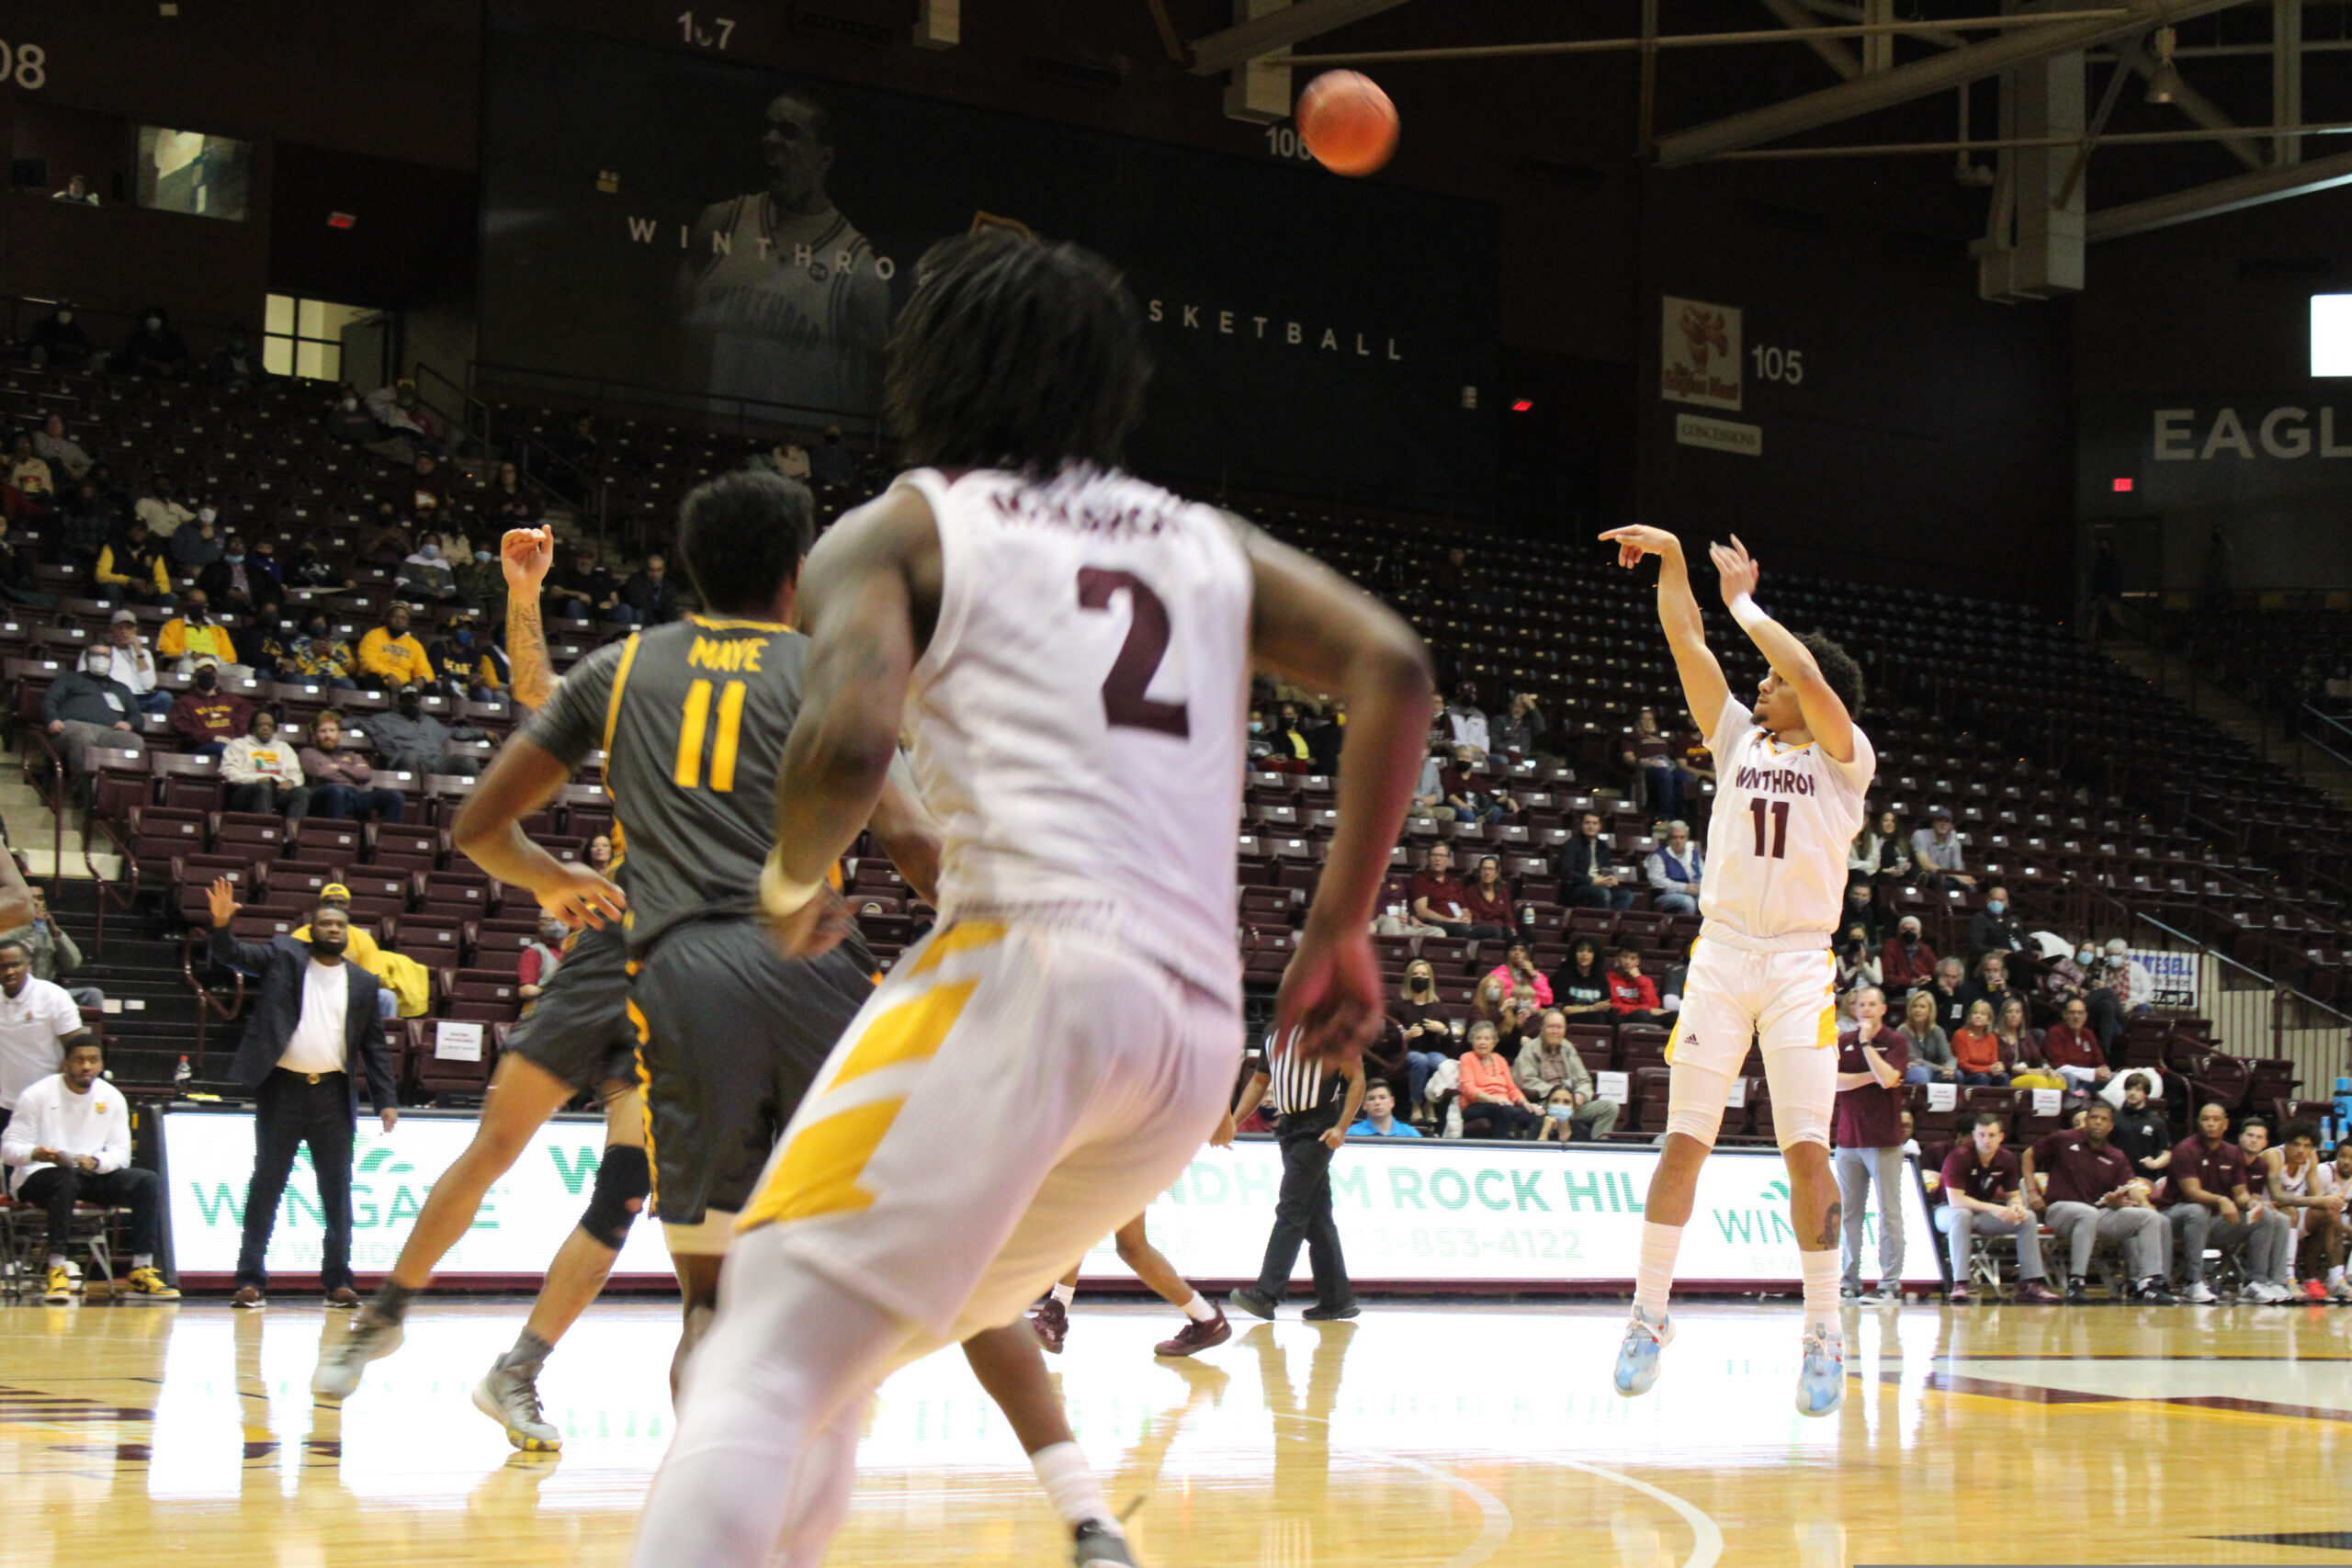 Winthrop wins soundly in latest two men’s basketball victories